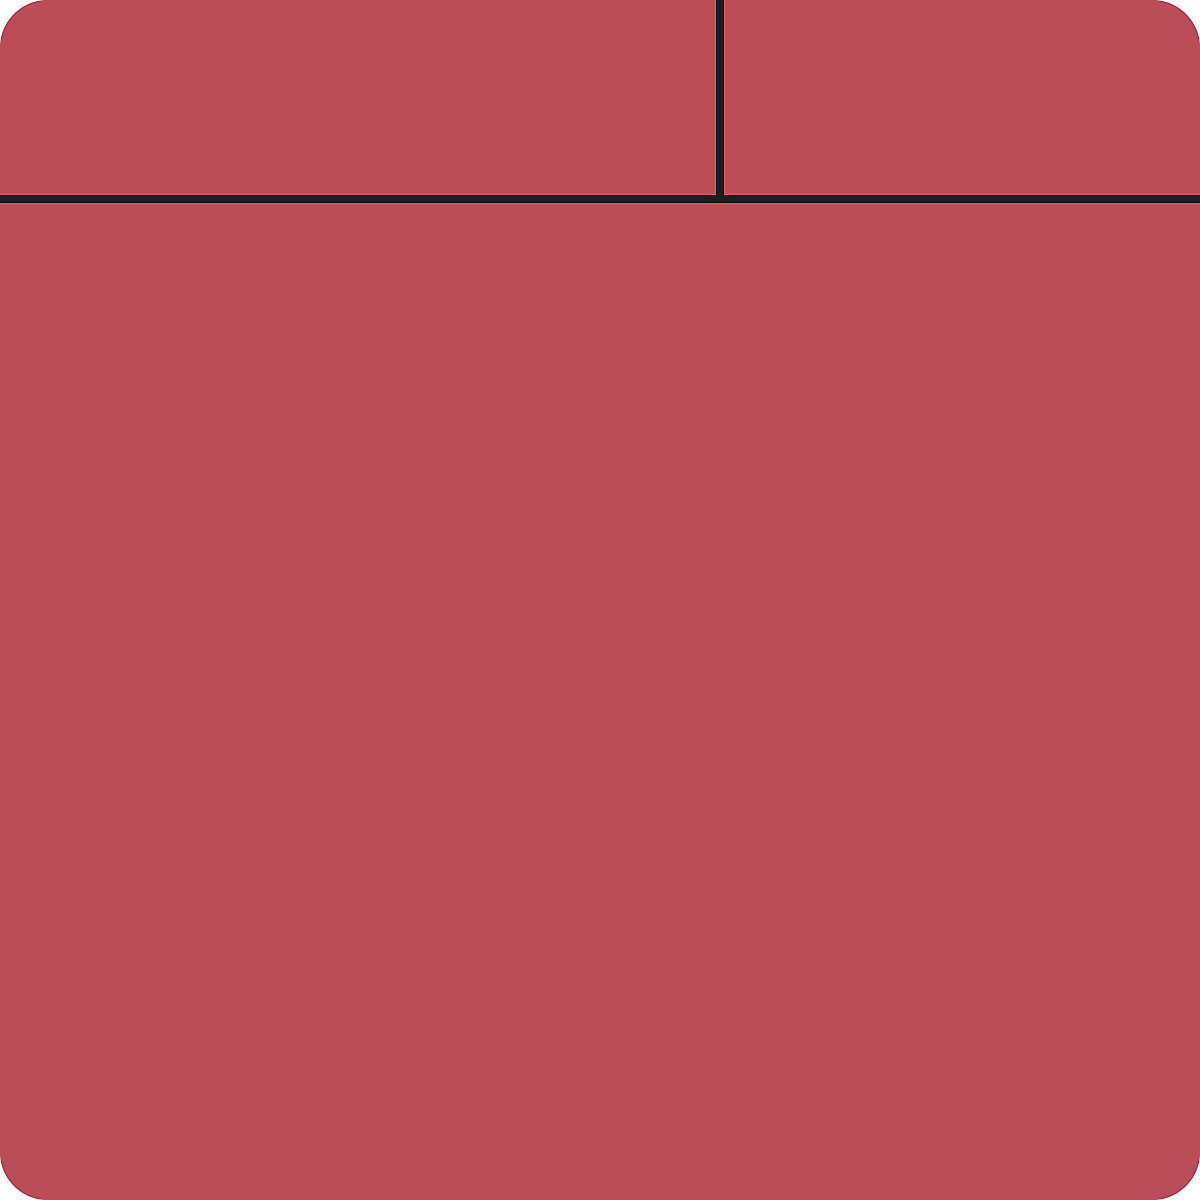 Post-it notes, LxW 75 x 75 mm, pack of 10, red